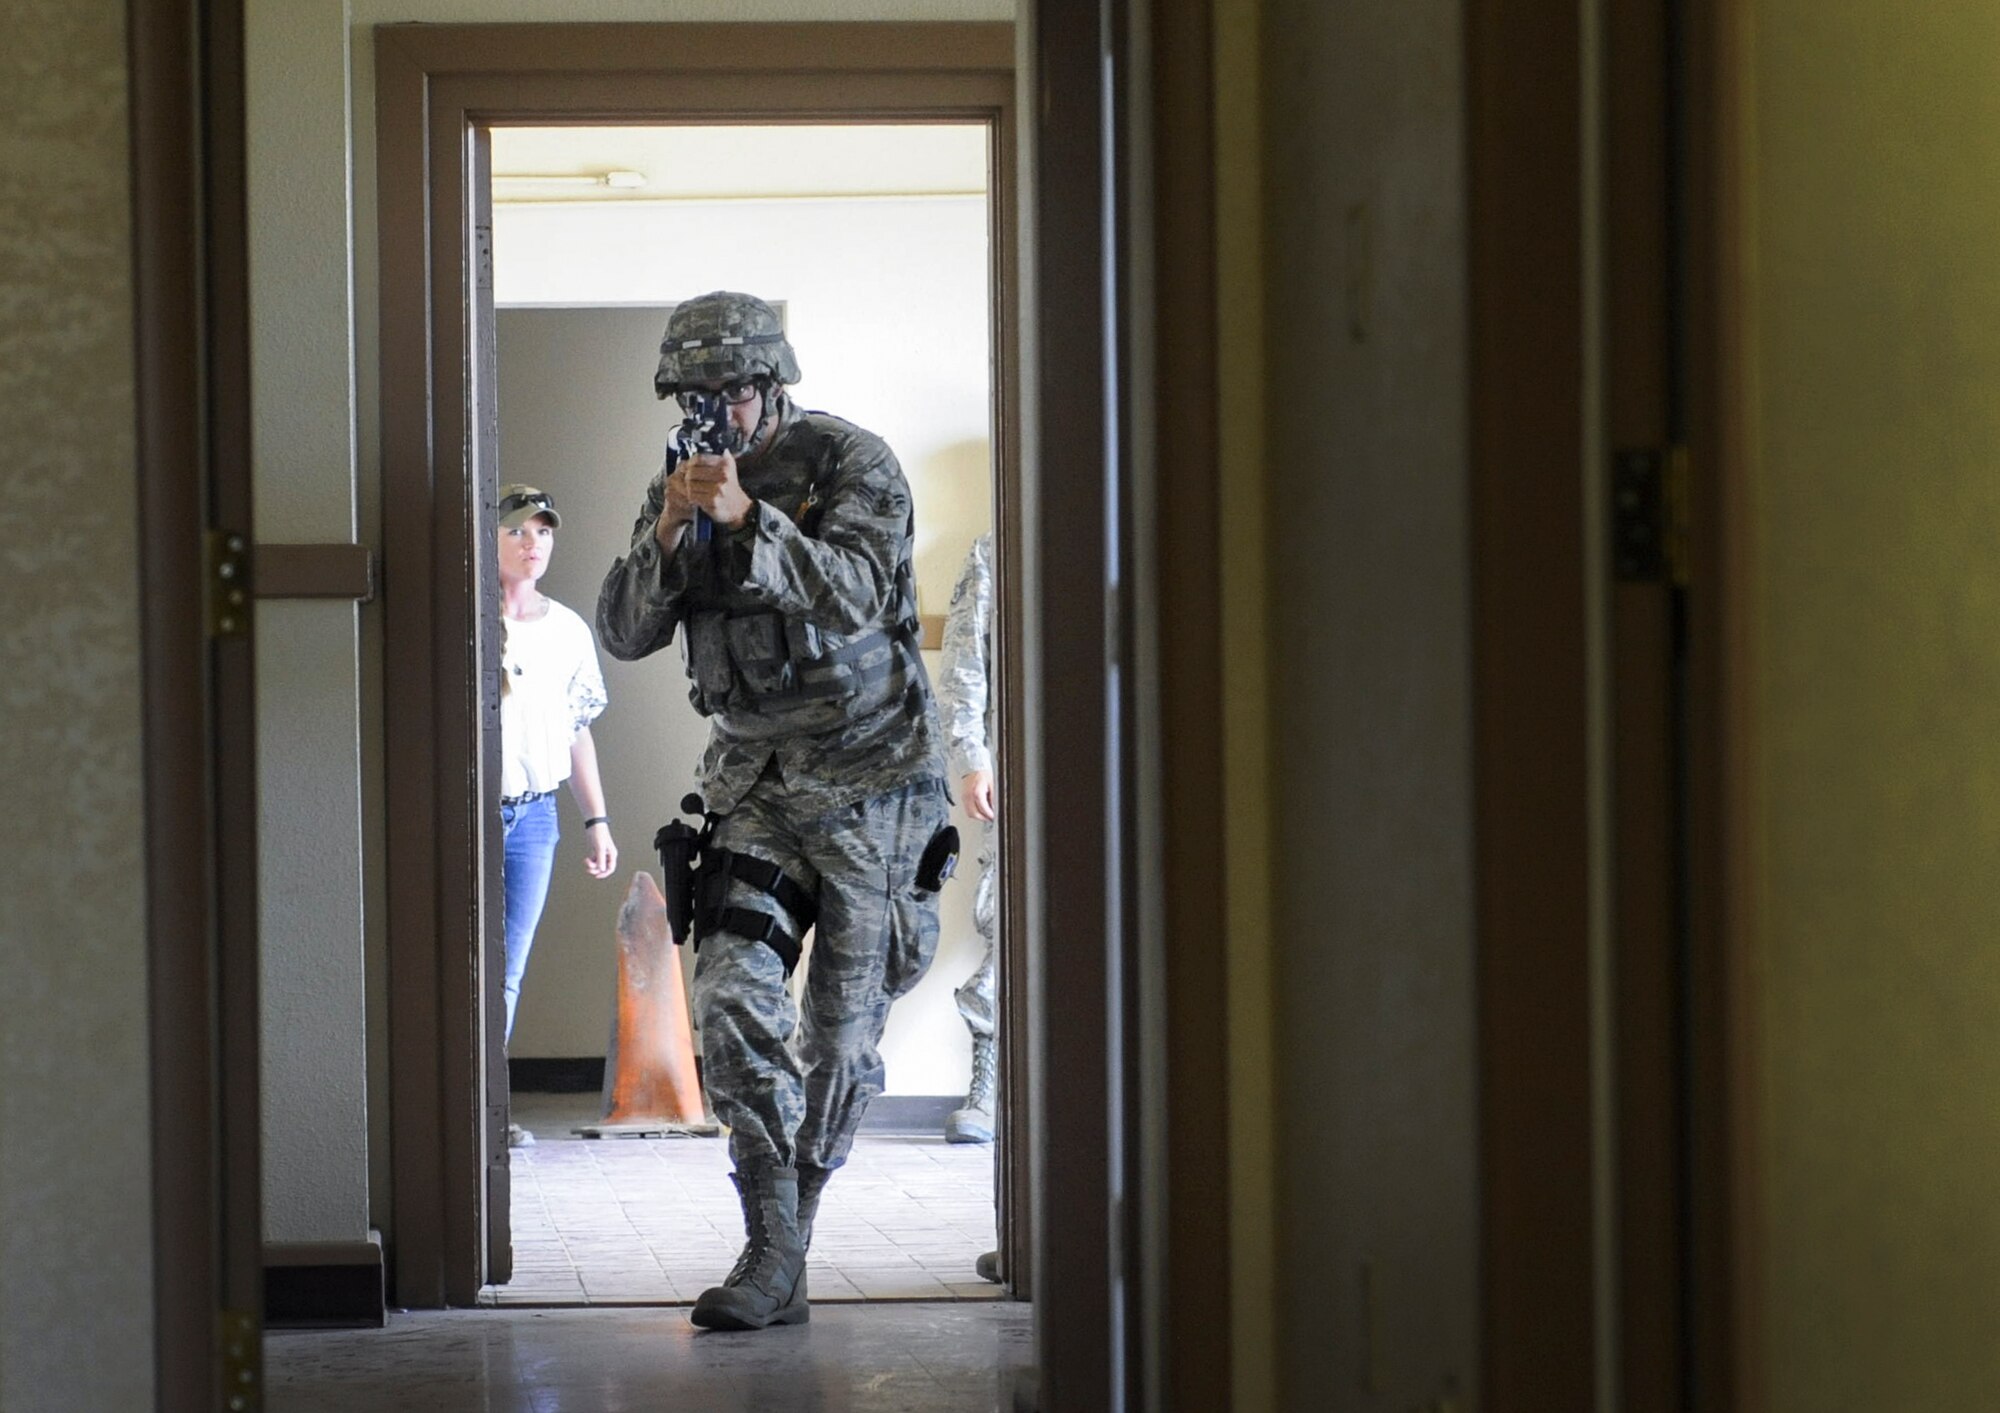 Airman 1st Class Nicolus Thompson, 99th Security Forces Squadron member, enters a simulated active shooter scenario in Area II on Nellis Air Force Base, Nev., May 17, 2017. Defenders of the 99th SFS immediately followed established procedures to respond to and neutralize the simulated threat. (U.S. Air Force photo by Senior Airman Kevin Tanenbaum/Released)